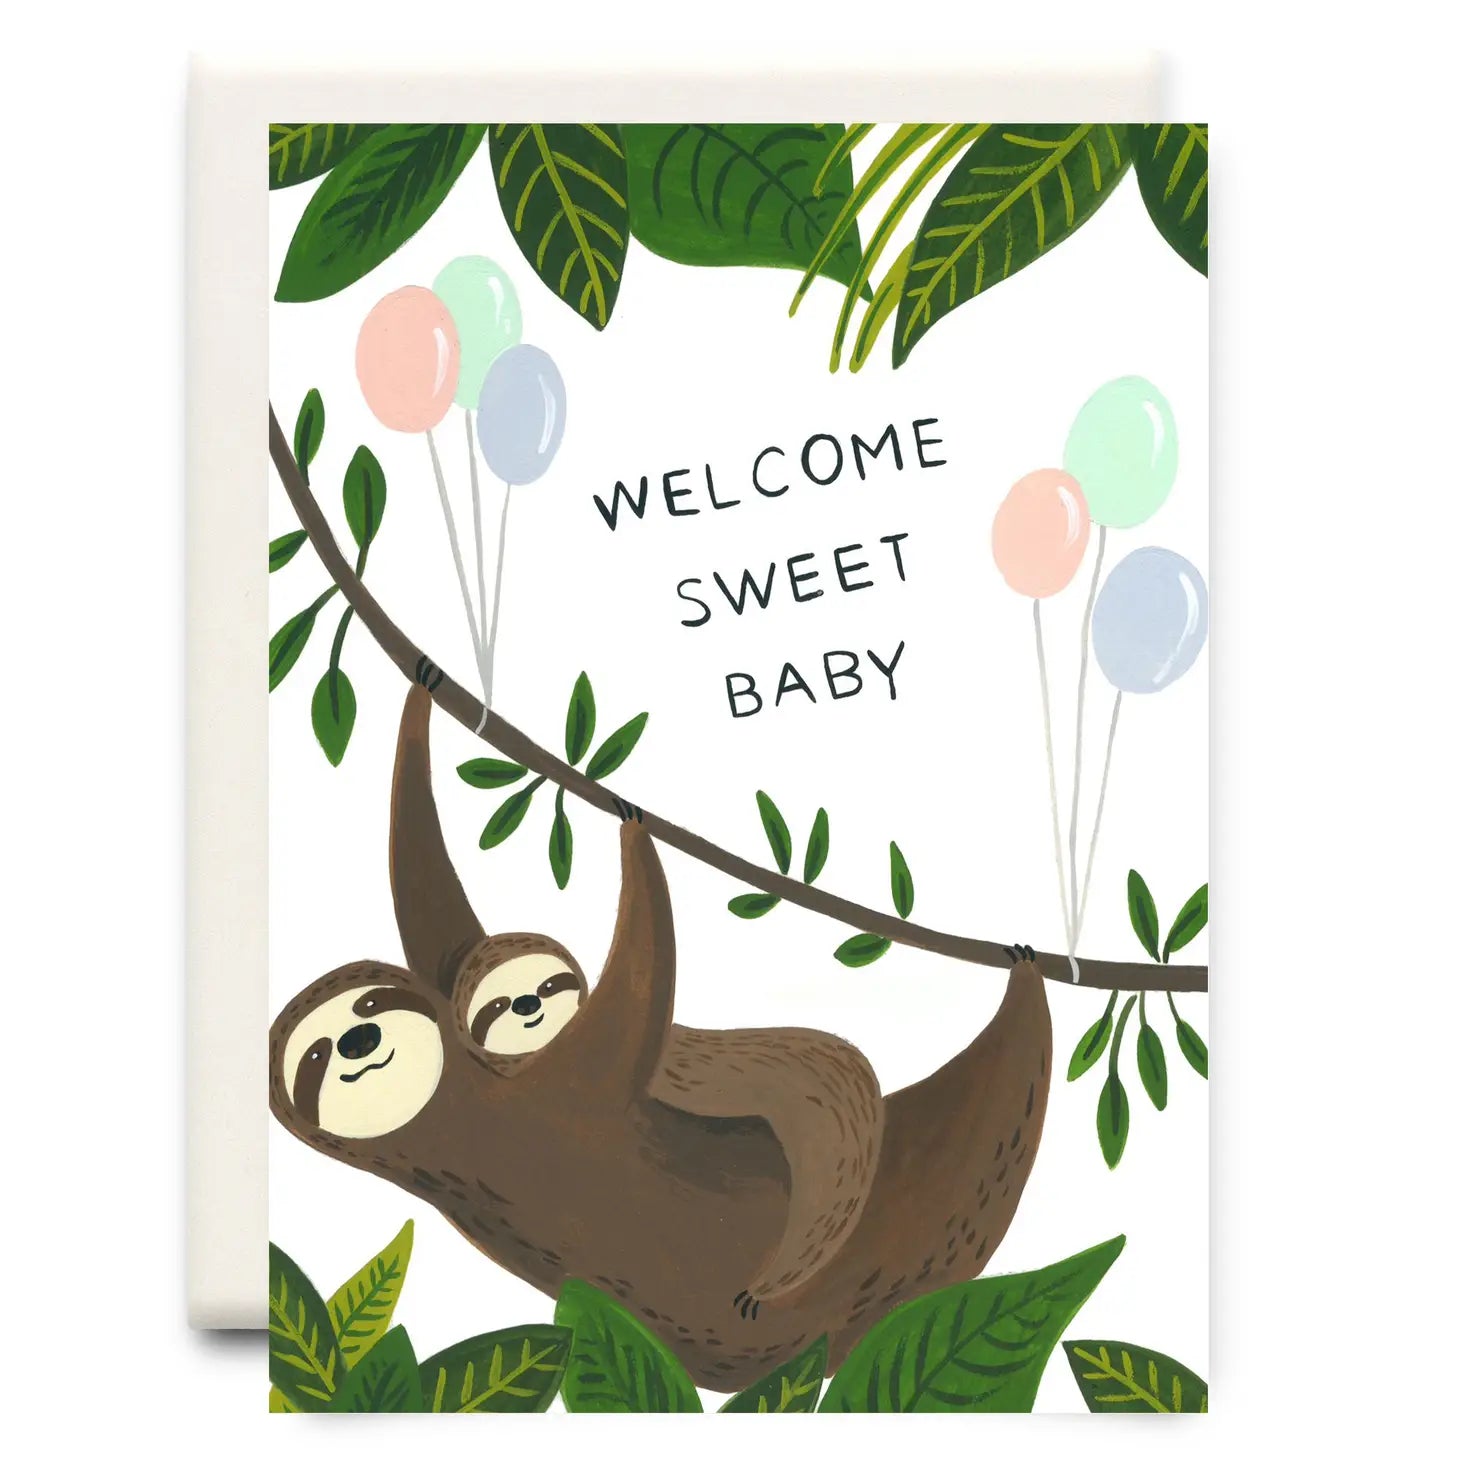 Inkwell Cards “Welcome Sweet Baby” Card